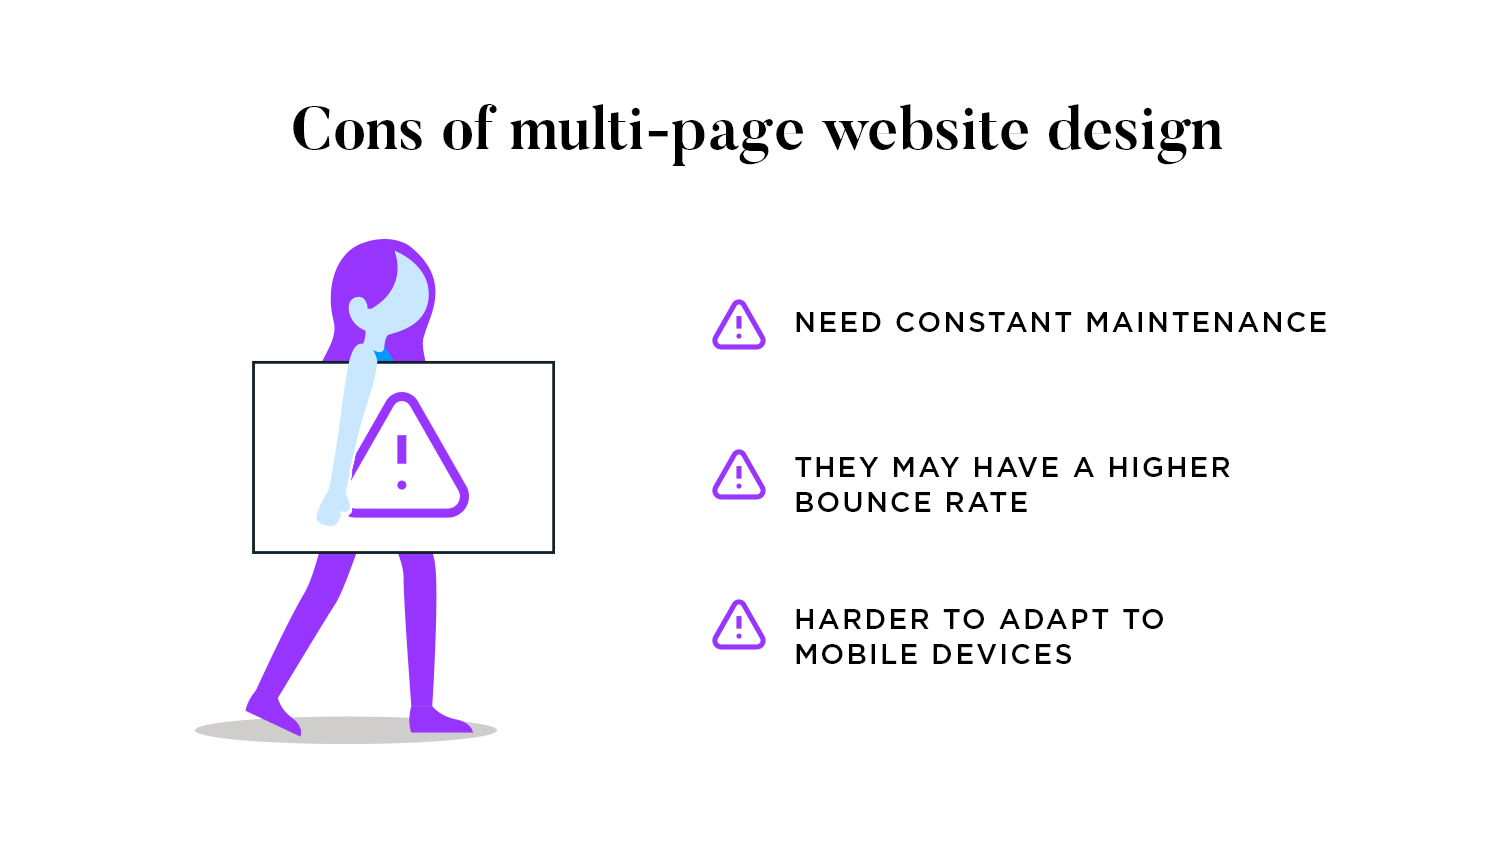 Infographic showing cons of multi-page websites: needs maintenance, higher bounce rate, not mobile-friendly